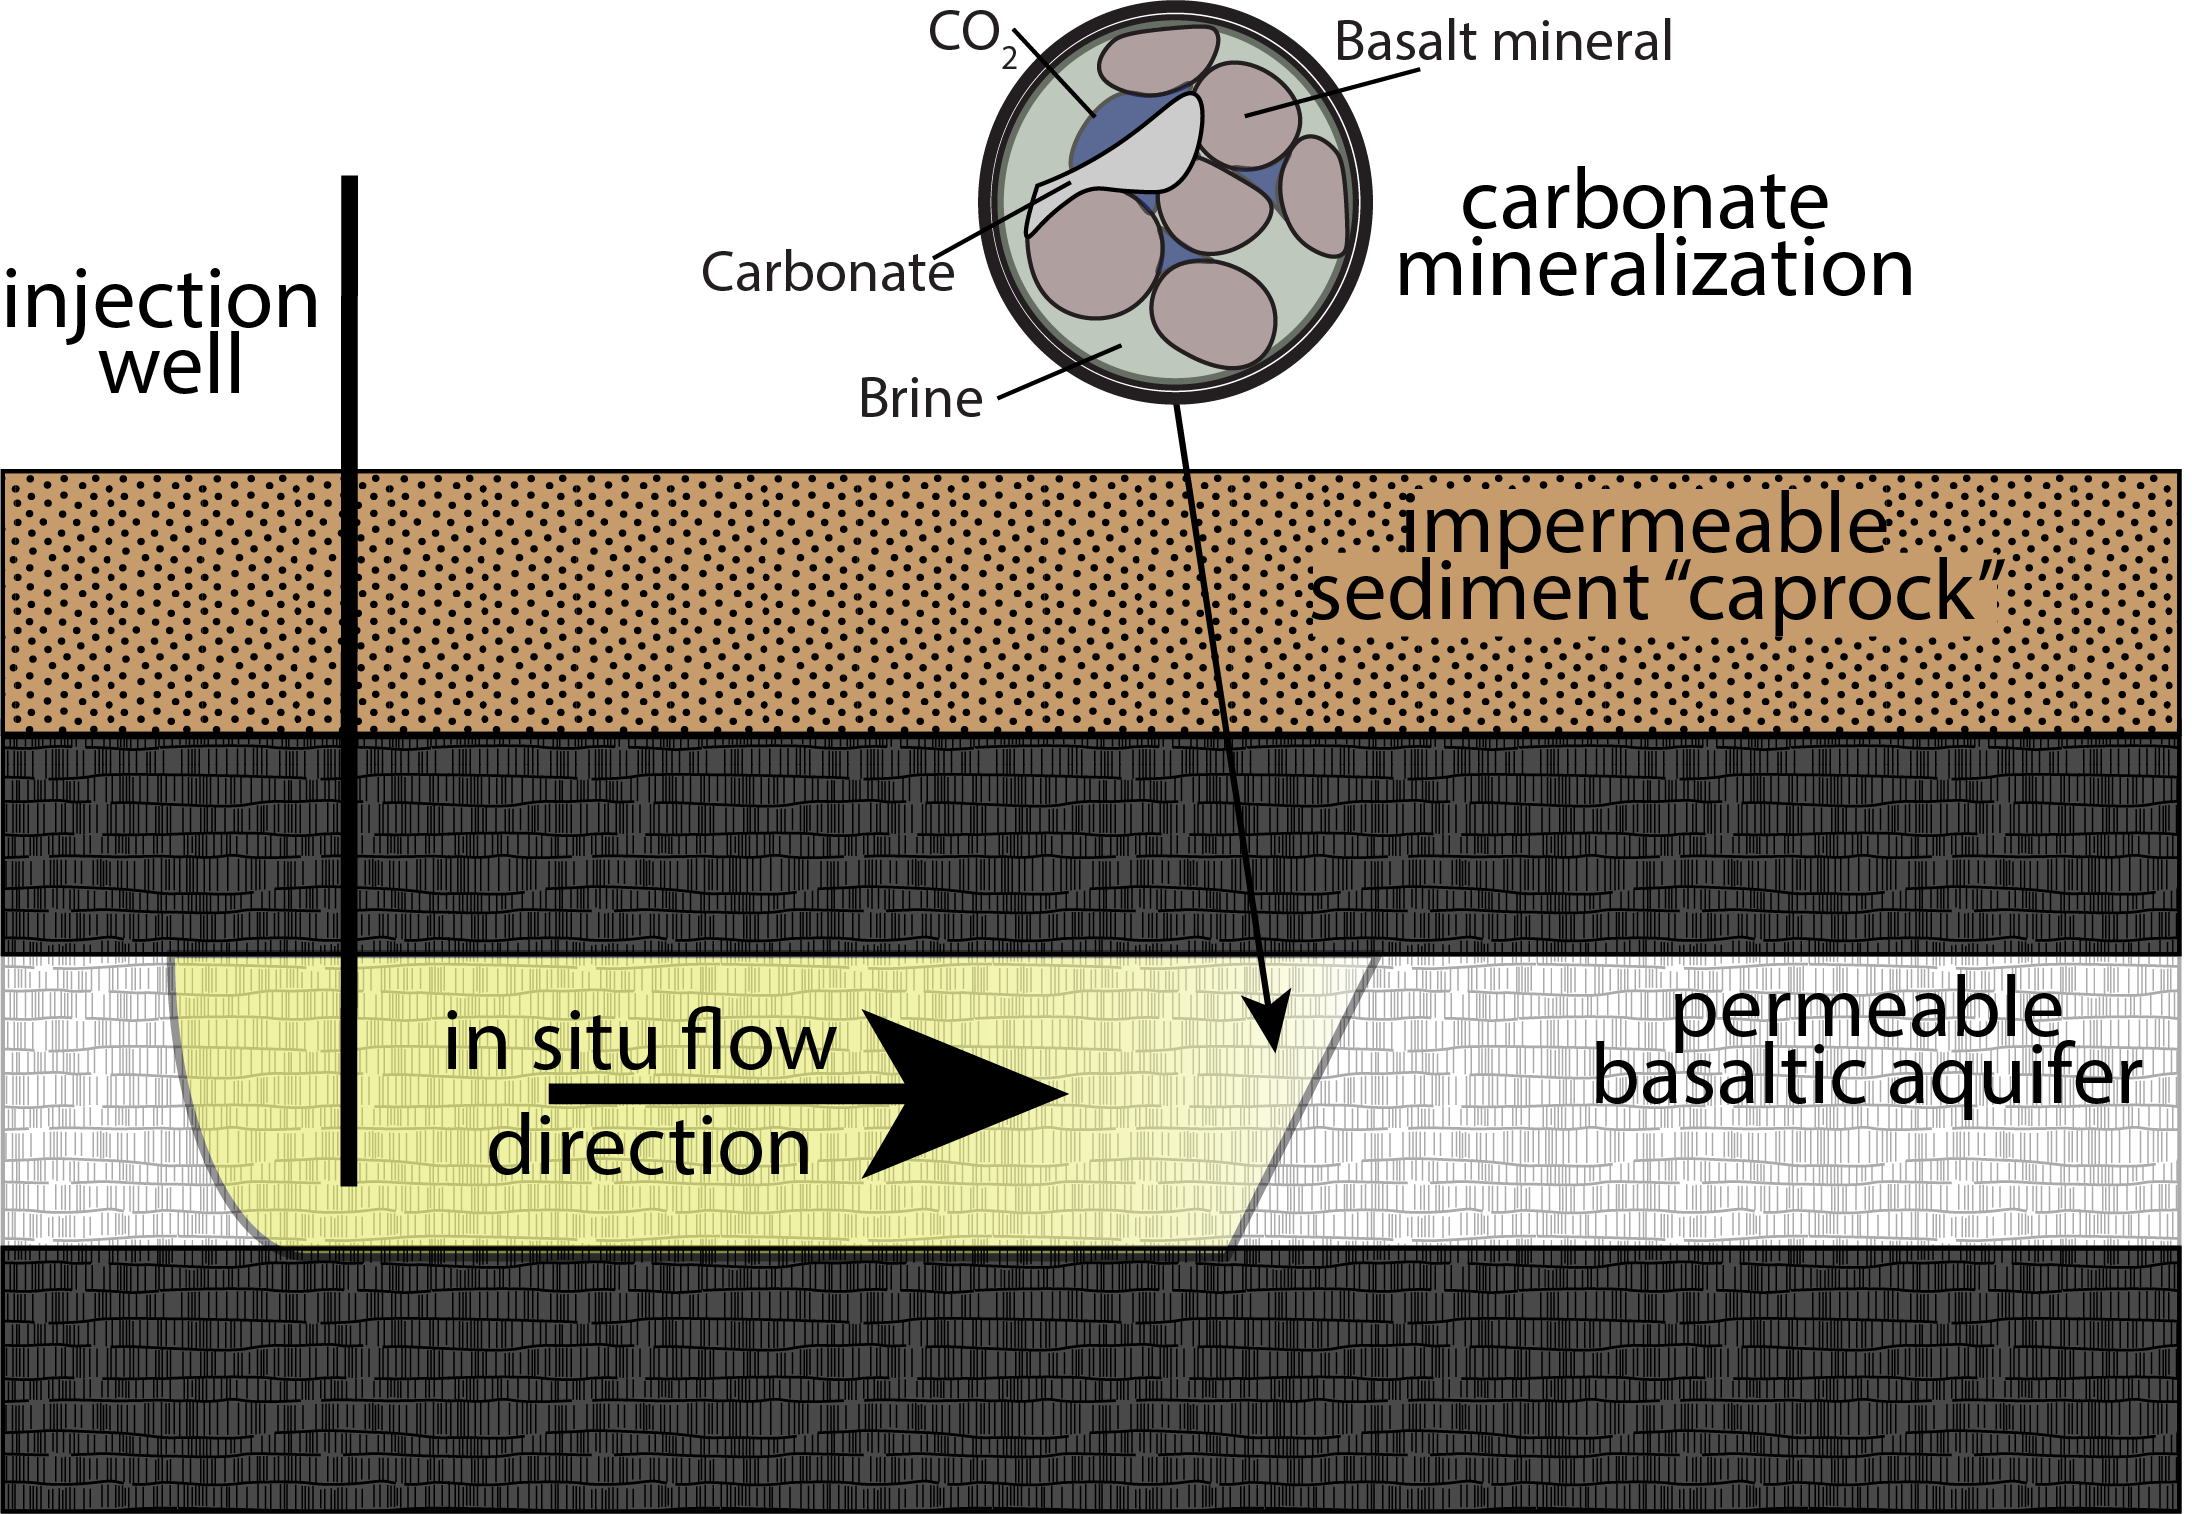 Carbon mineralization during the Solid Carbon process. Carbon dioxide (yellow) is injected into the basaltic aquifer, where it reacts with the basalt to become rock.